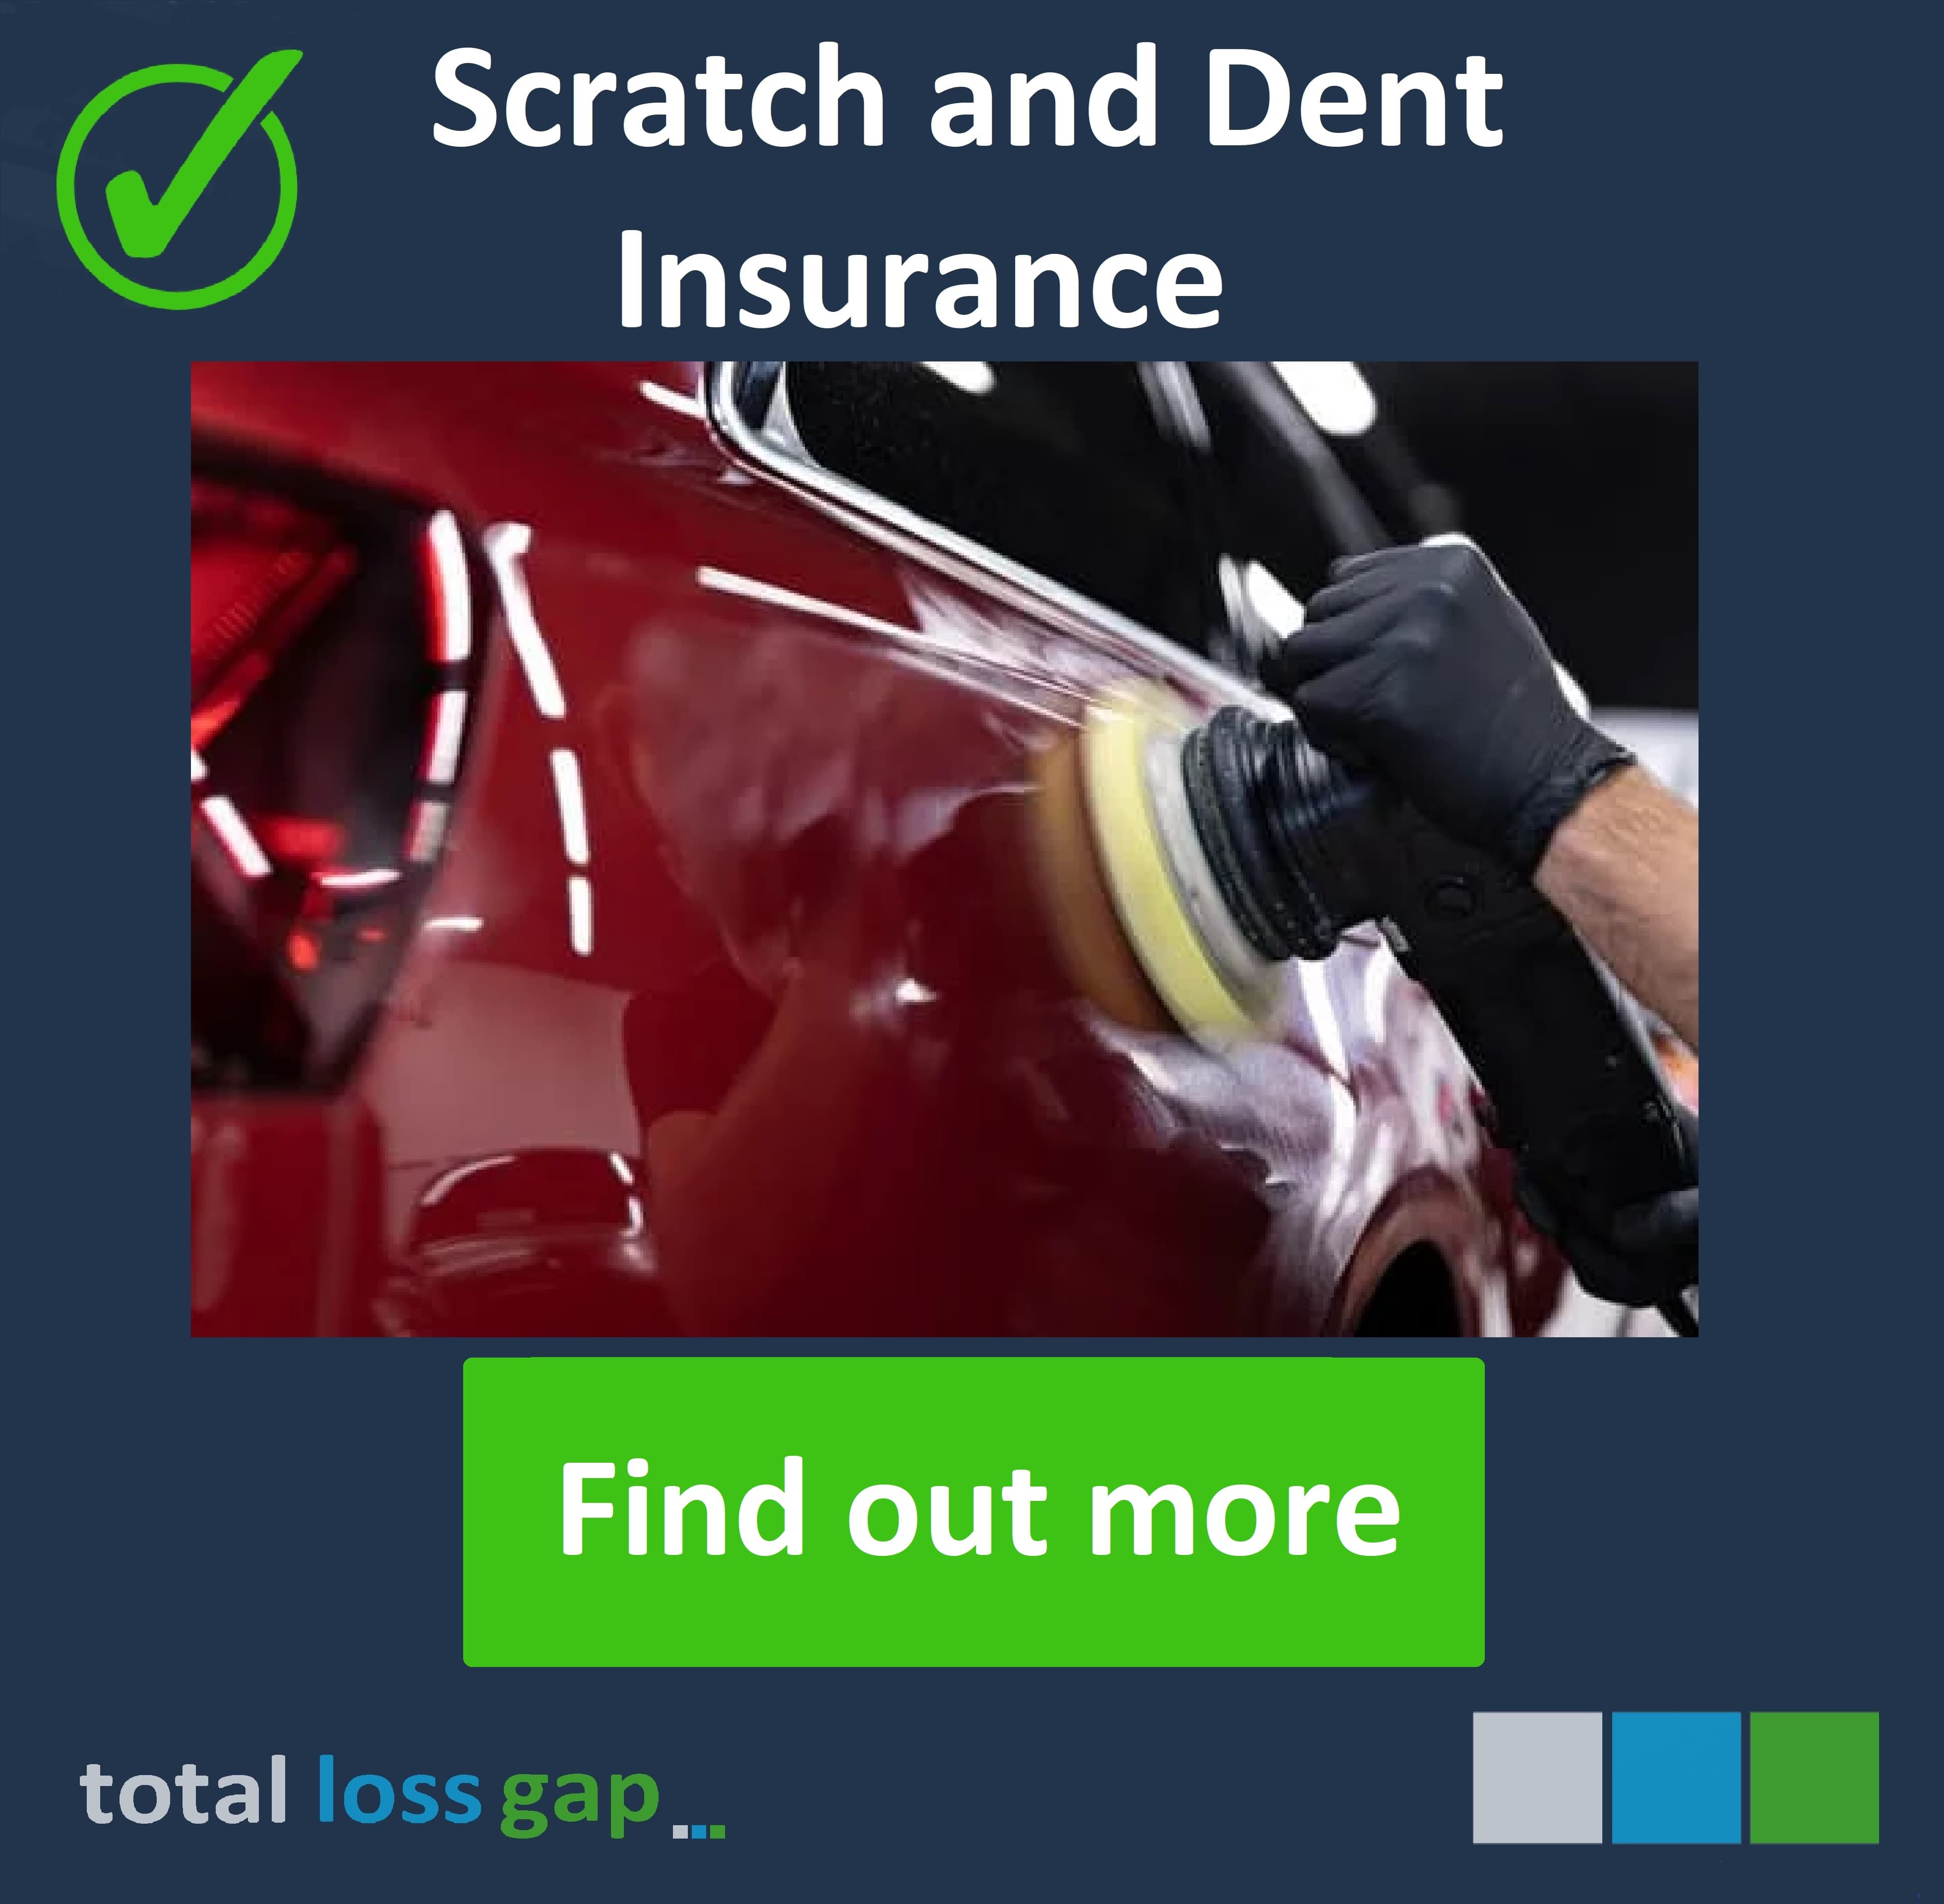 Find out more about Scratch & Dent cover